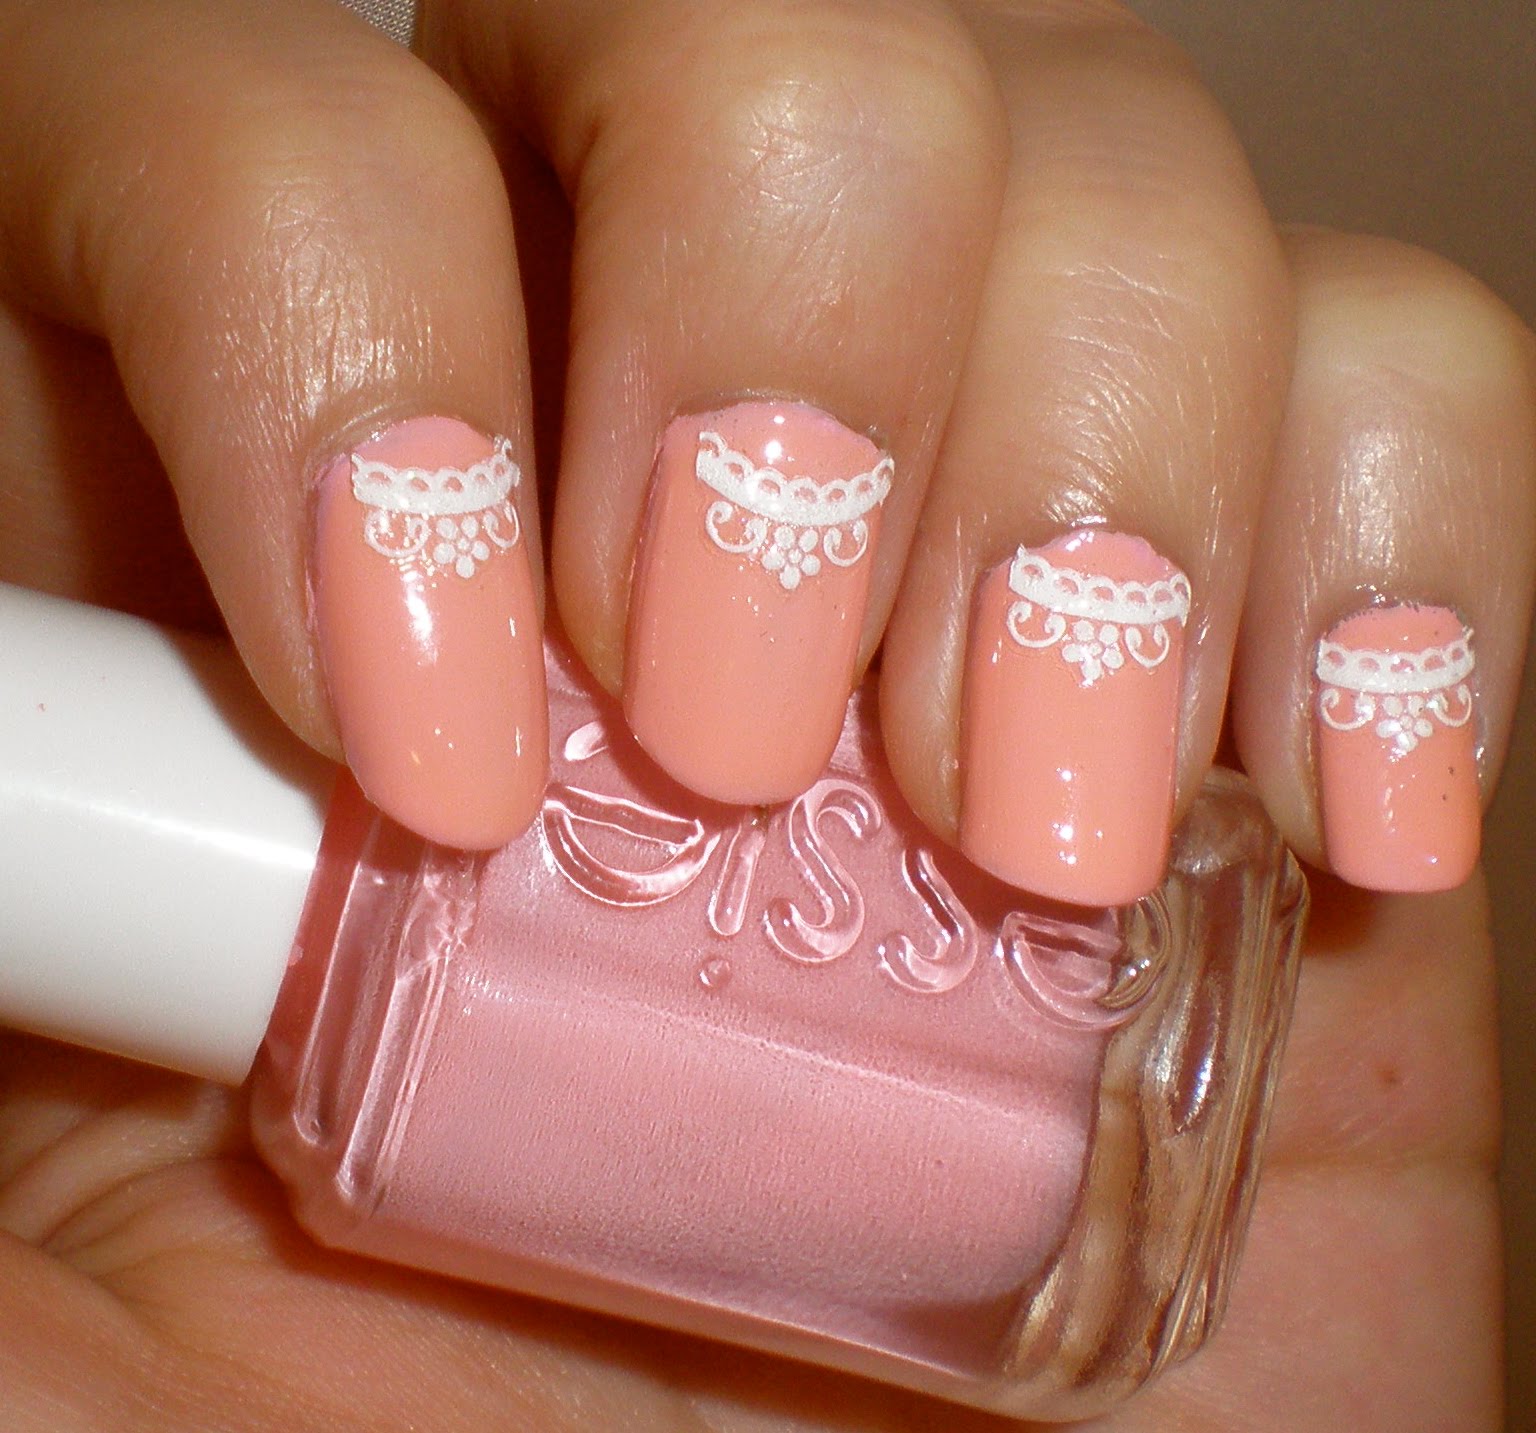 I love any easy nail design! This one is very easy and pretty